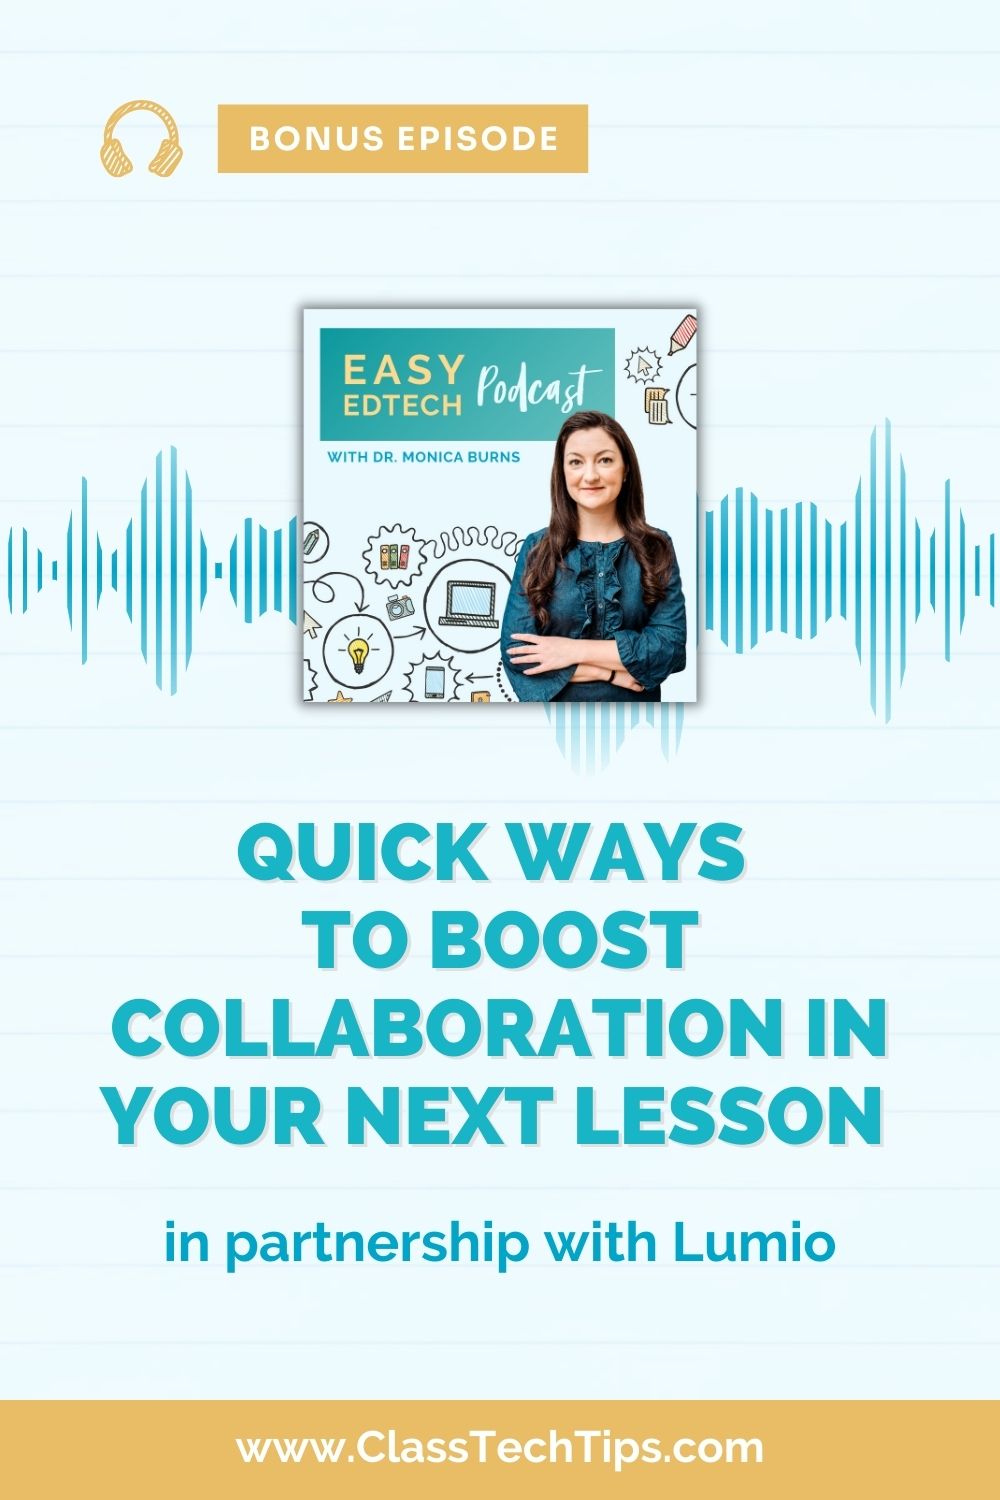 SMART Technologies communities manager and educator, Kacie Germadnik, joins to discuss quick ways to boost collaboration in the classroom.